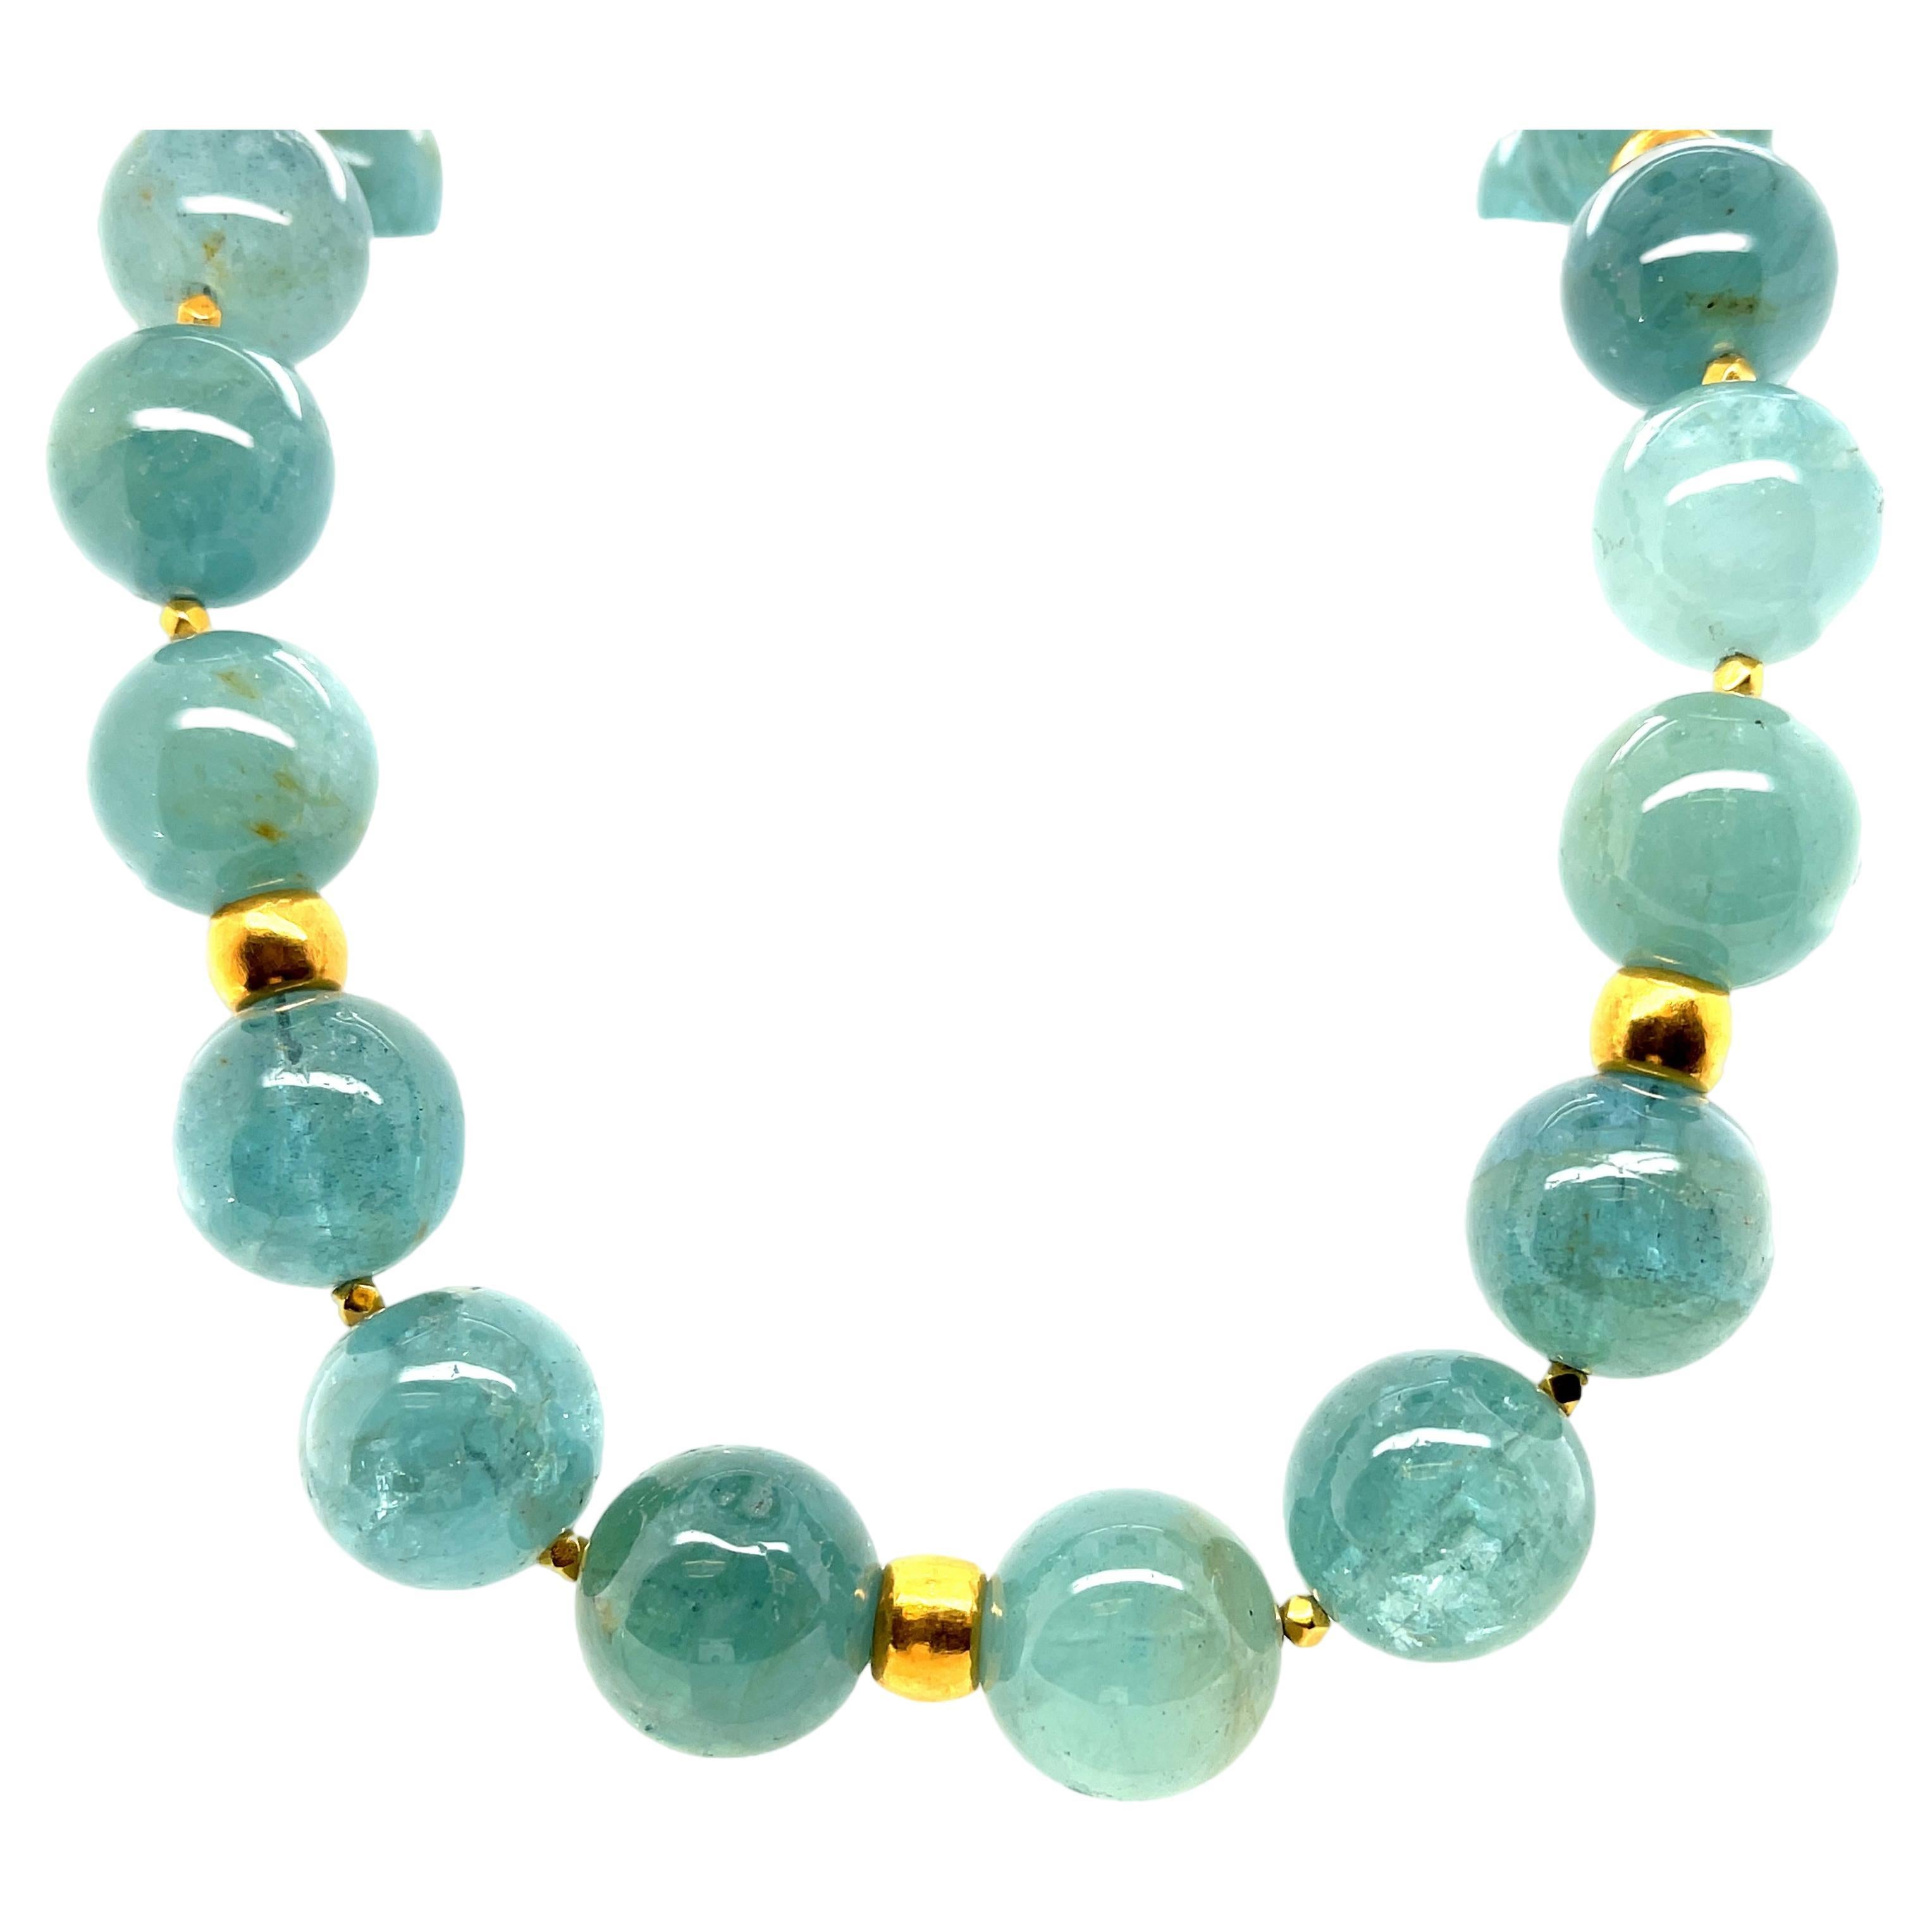 16mm Sea Foam Green Aquamarine Bead and 18k Yellow Gold Necklace, 20 Inches For Sale